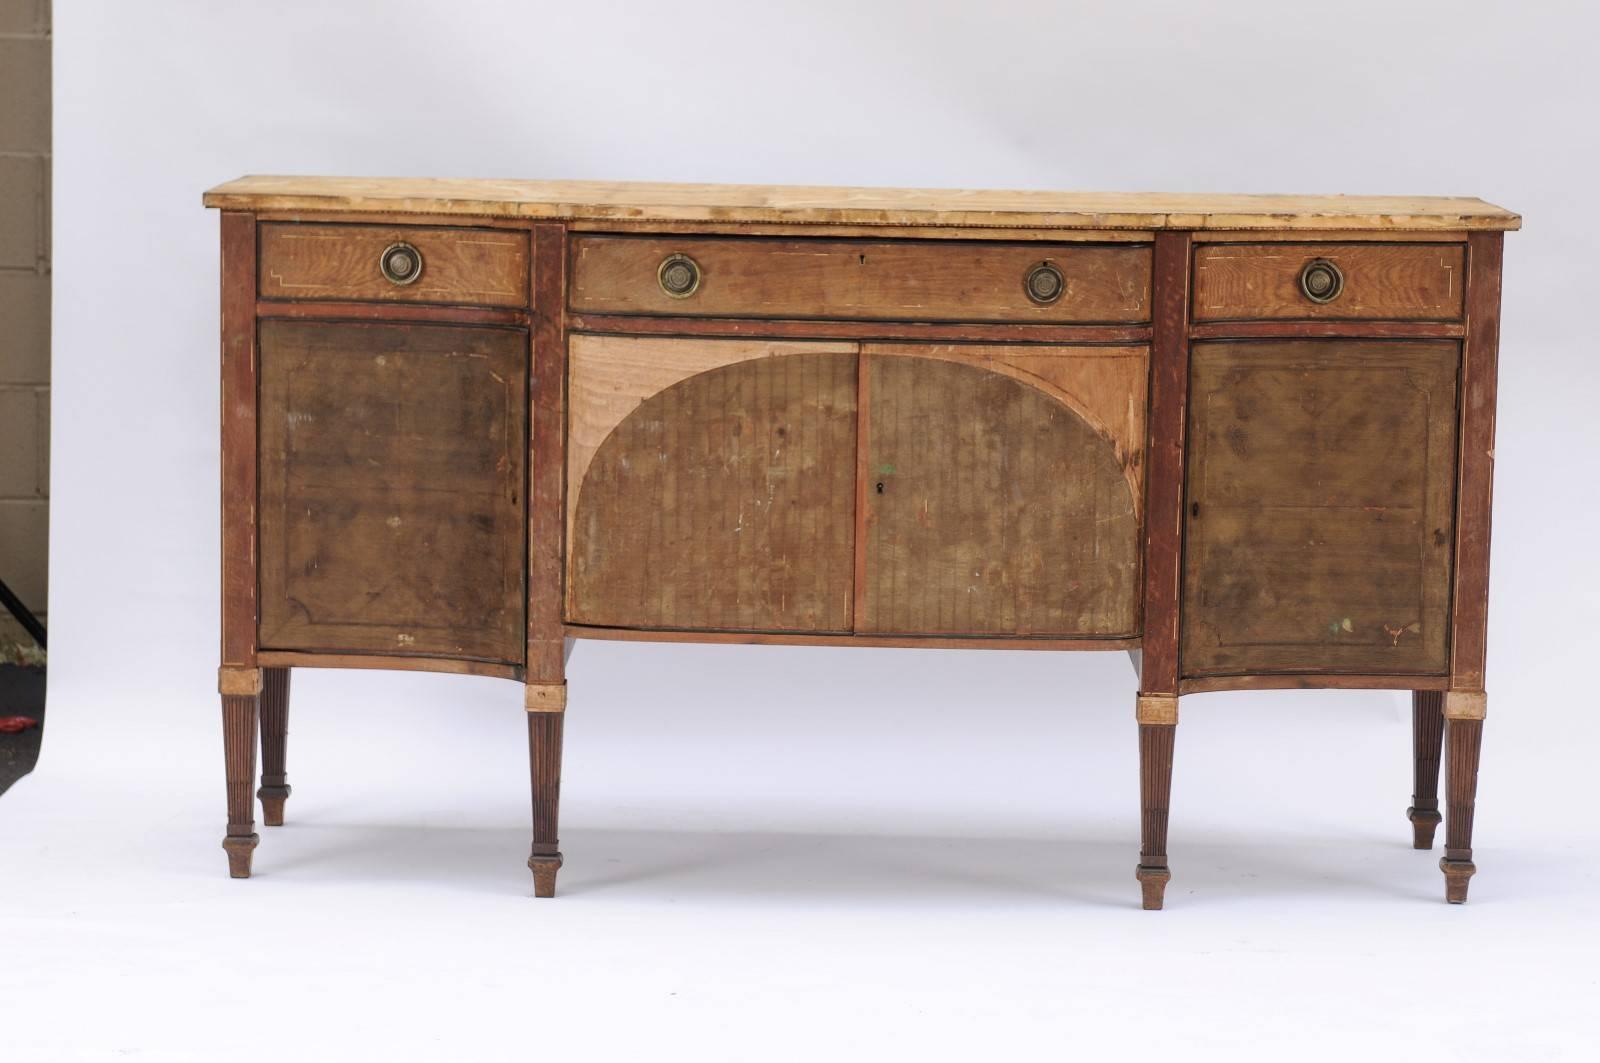 A French neoclassical style stripped wood serpentine four-door sideboard with tapered legs. This French four-door buffet features a serpentine shaped-top over three drawers and four doors. The ensemble is raised on six fluted tapered legs. When we